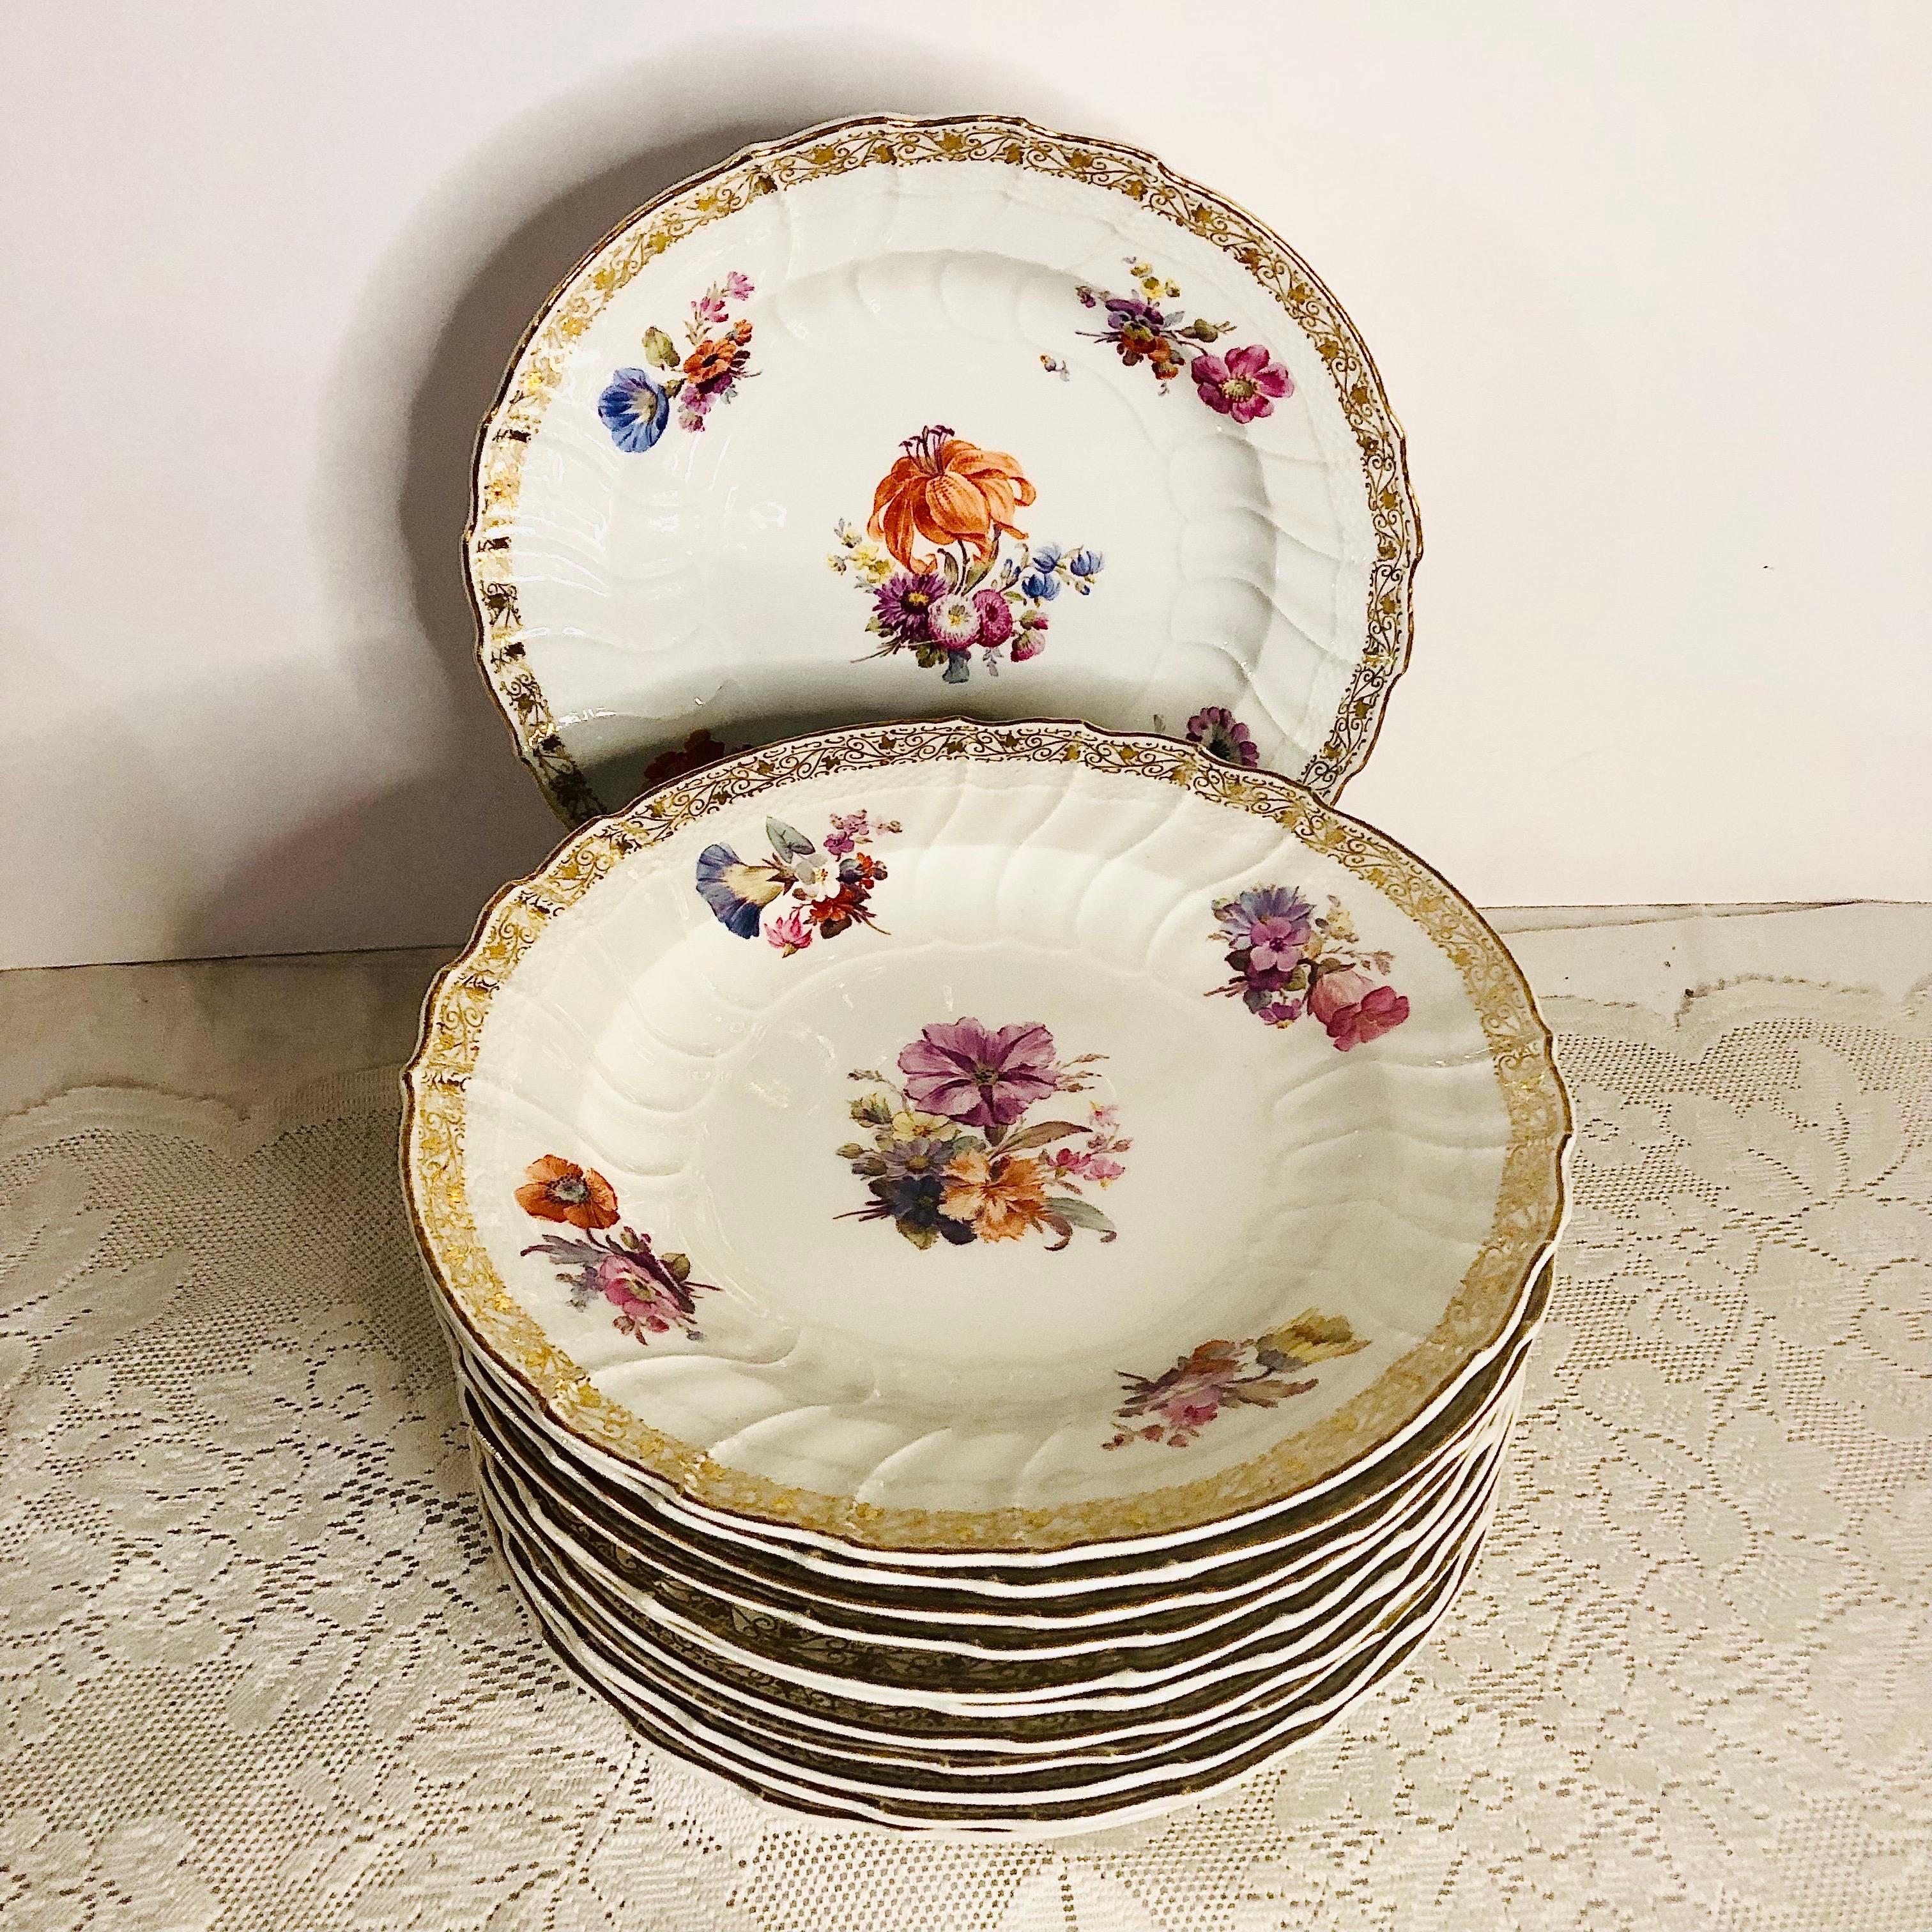 12 KPM Dinner Plates, Each Hand-Painted with a Different Central Flower Bouquet For Sale 10